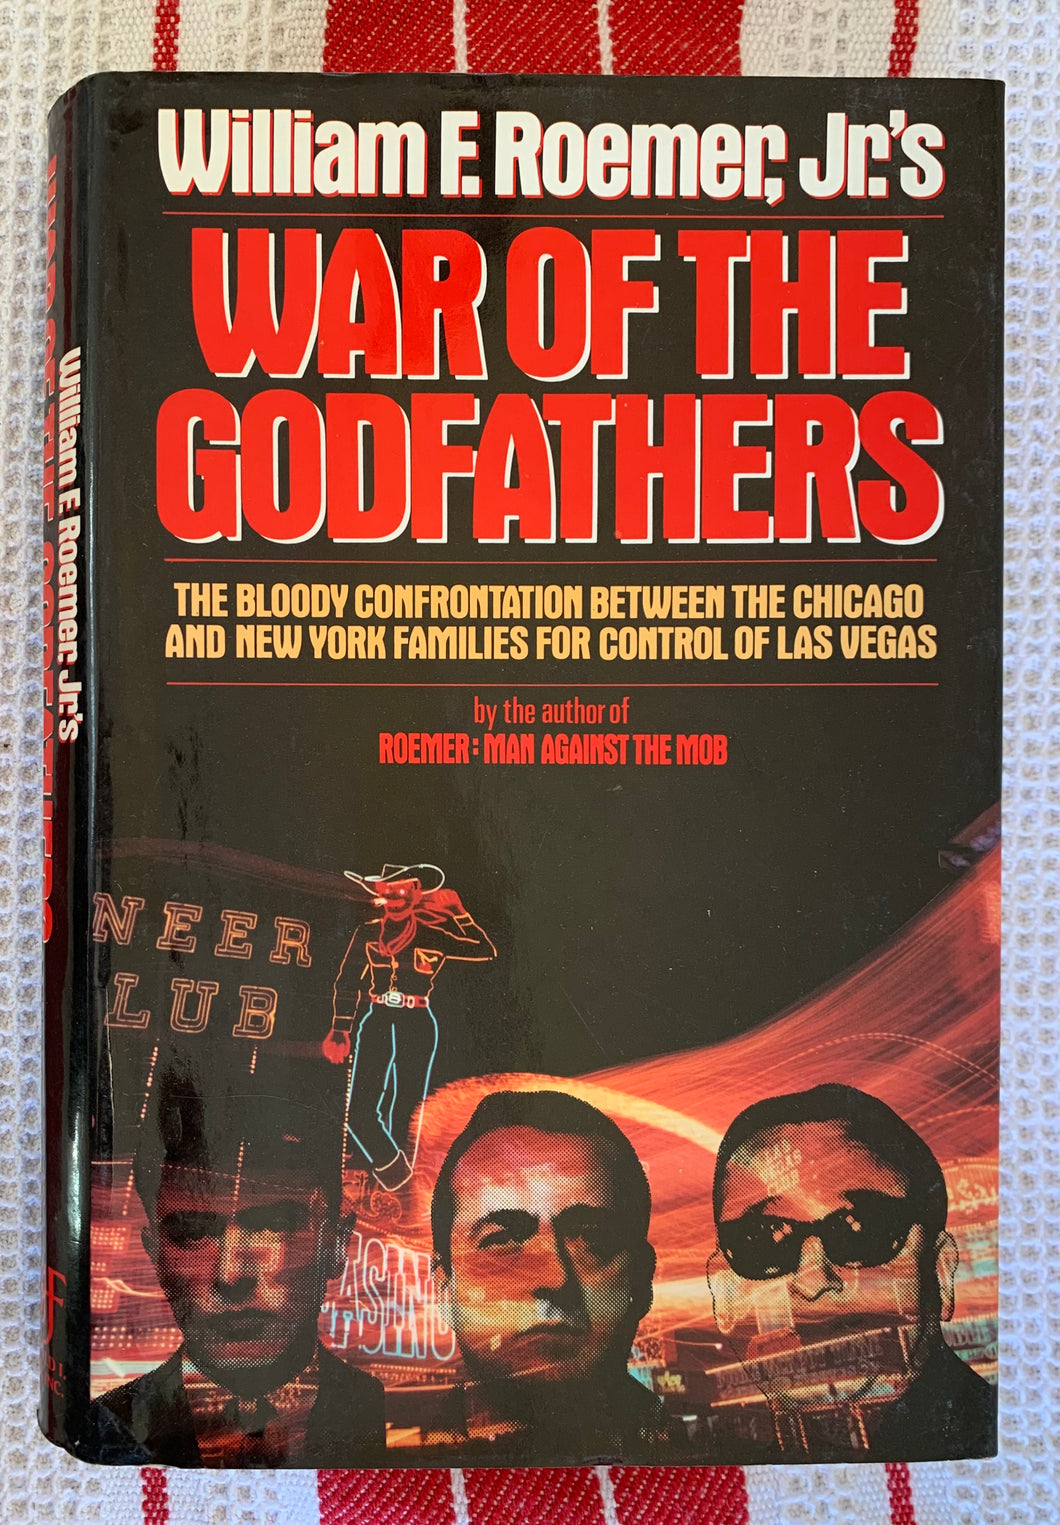 War Of The Godfathers: The Bloody Confrontation Between the Chicago and New York Families For Control of Las Vegas